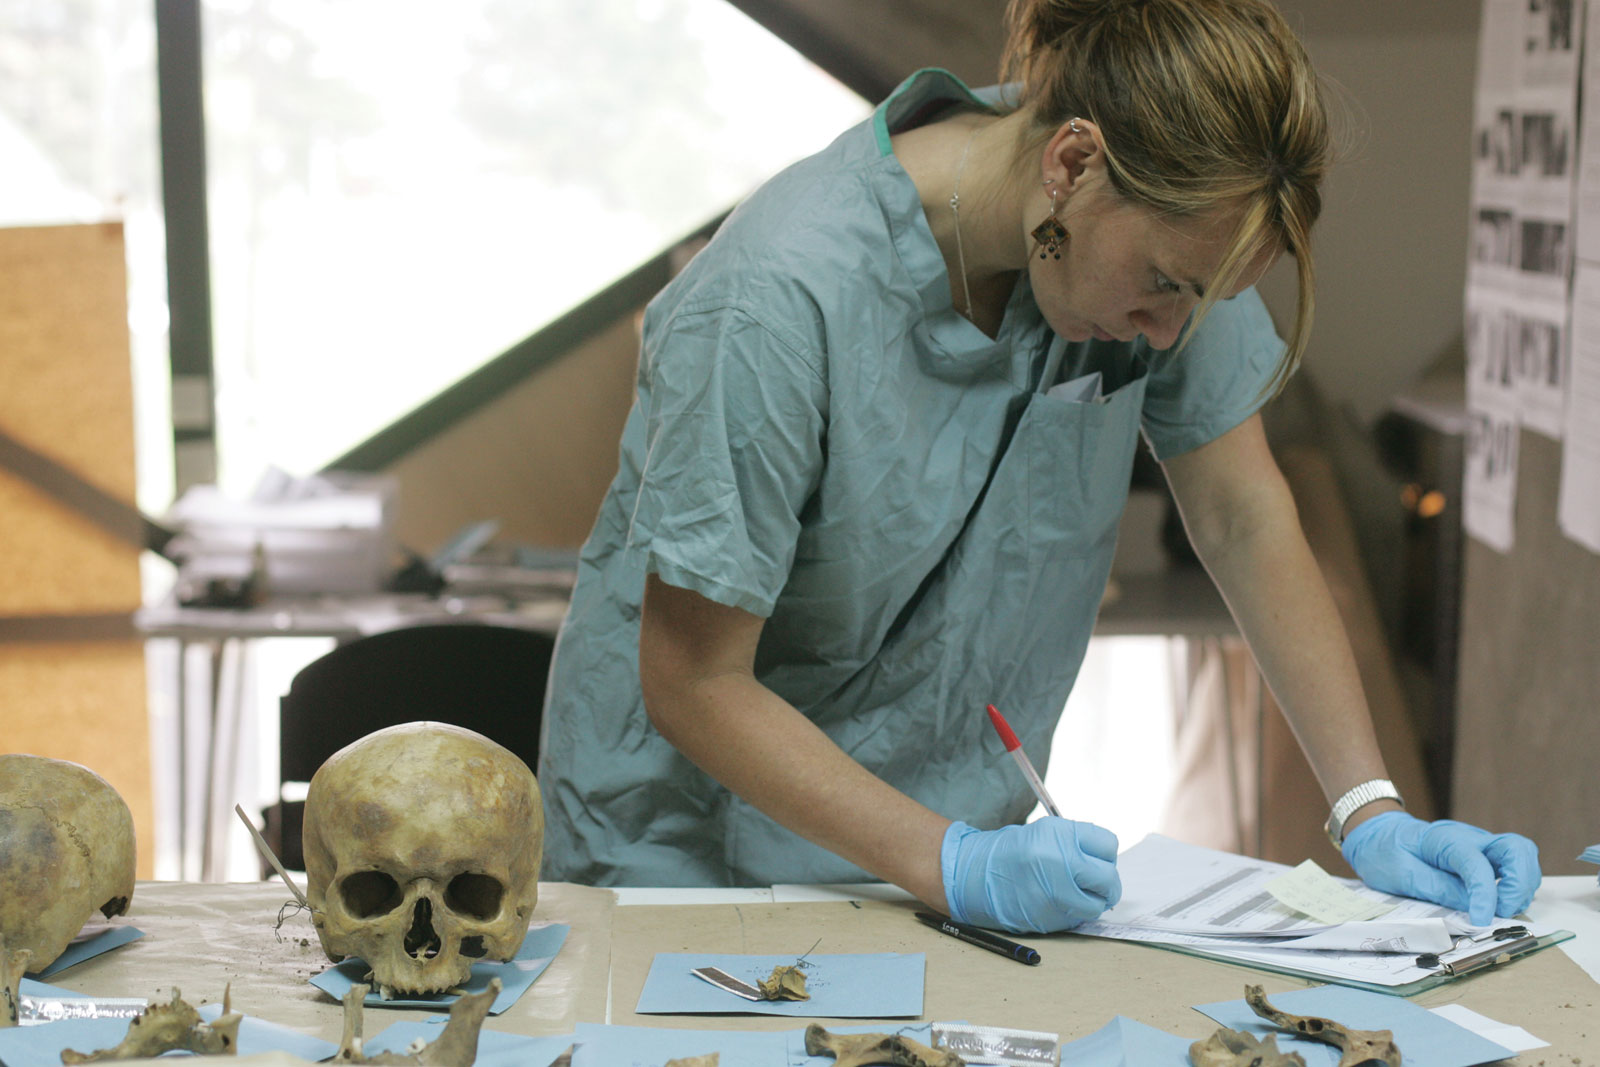 Forensic anthropology jobs available